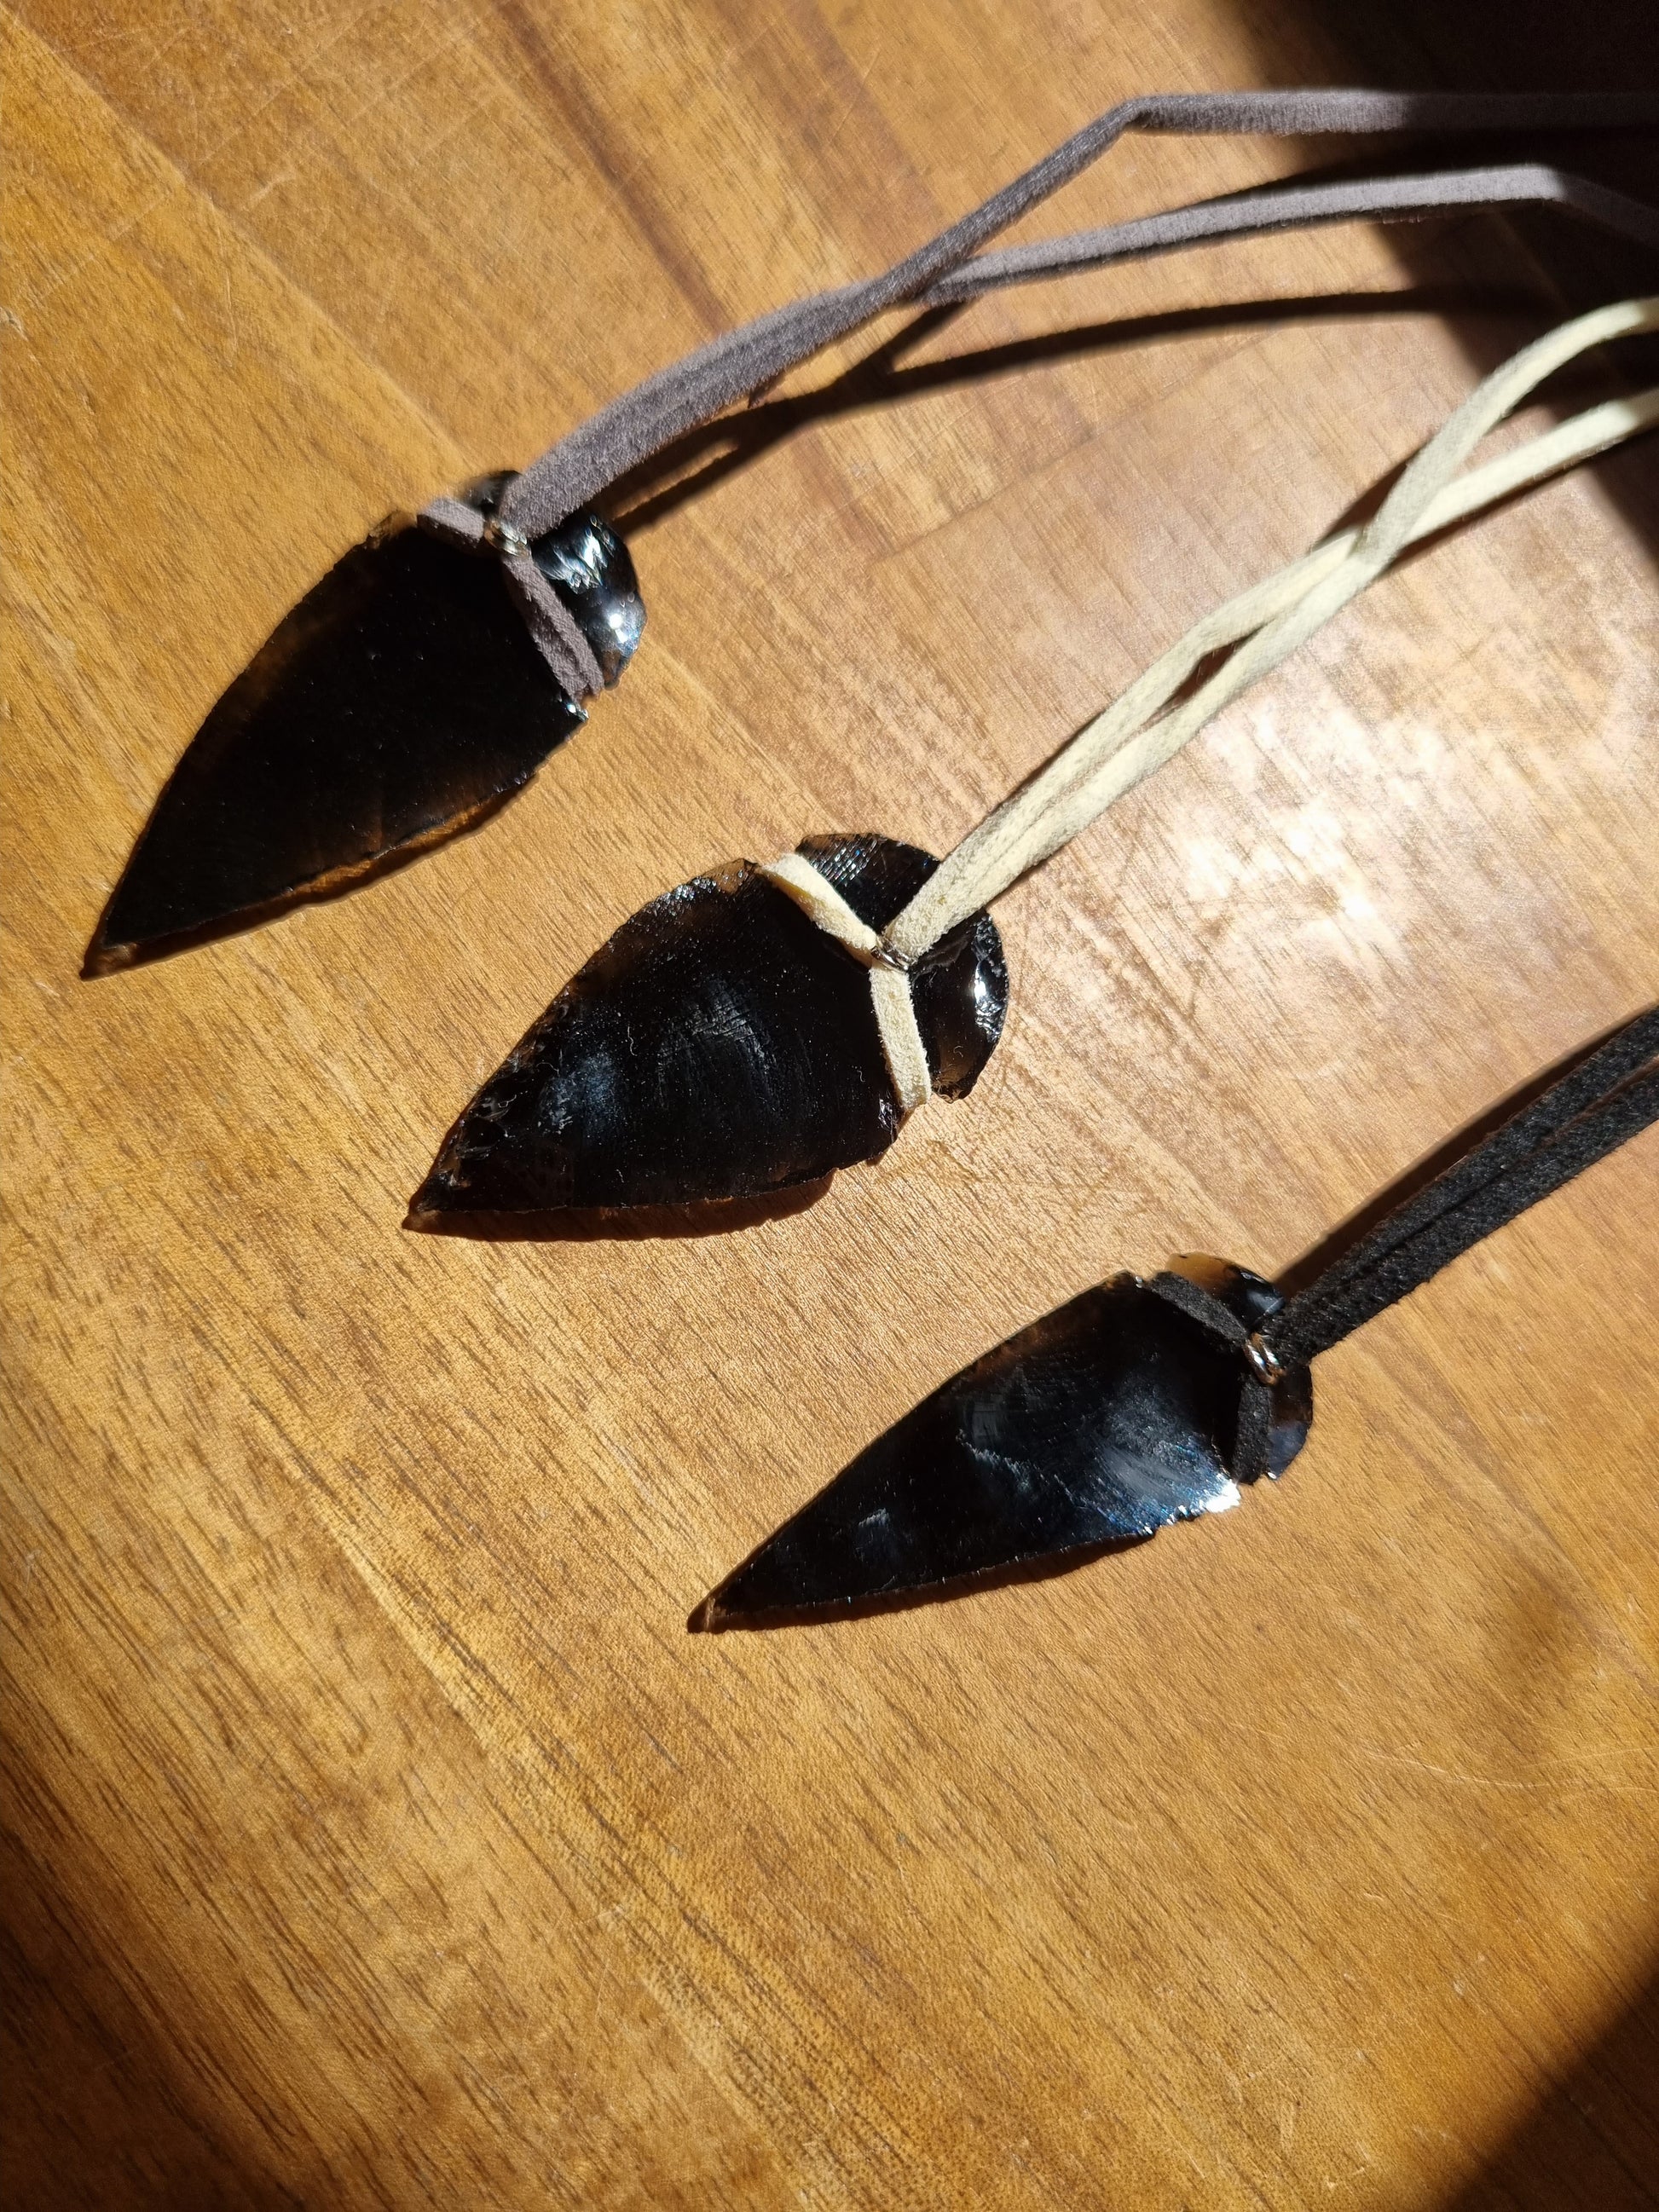 Black Obsidian Arrow Head Pendant With Adjustable Cord Necklace - Universal Fate